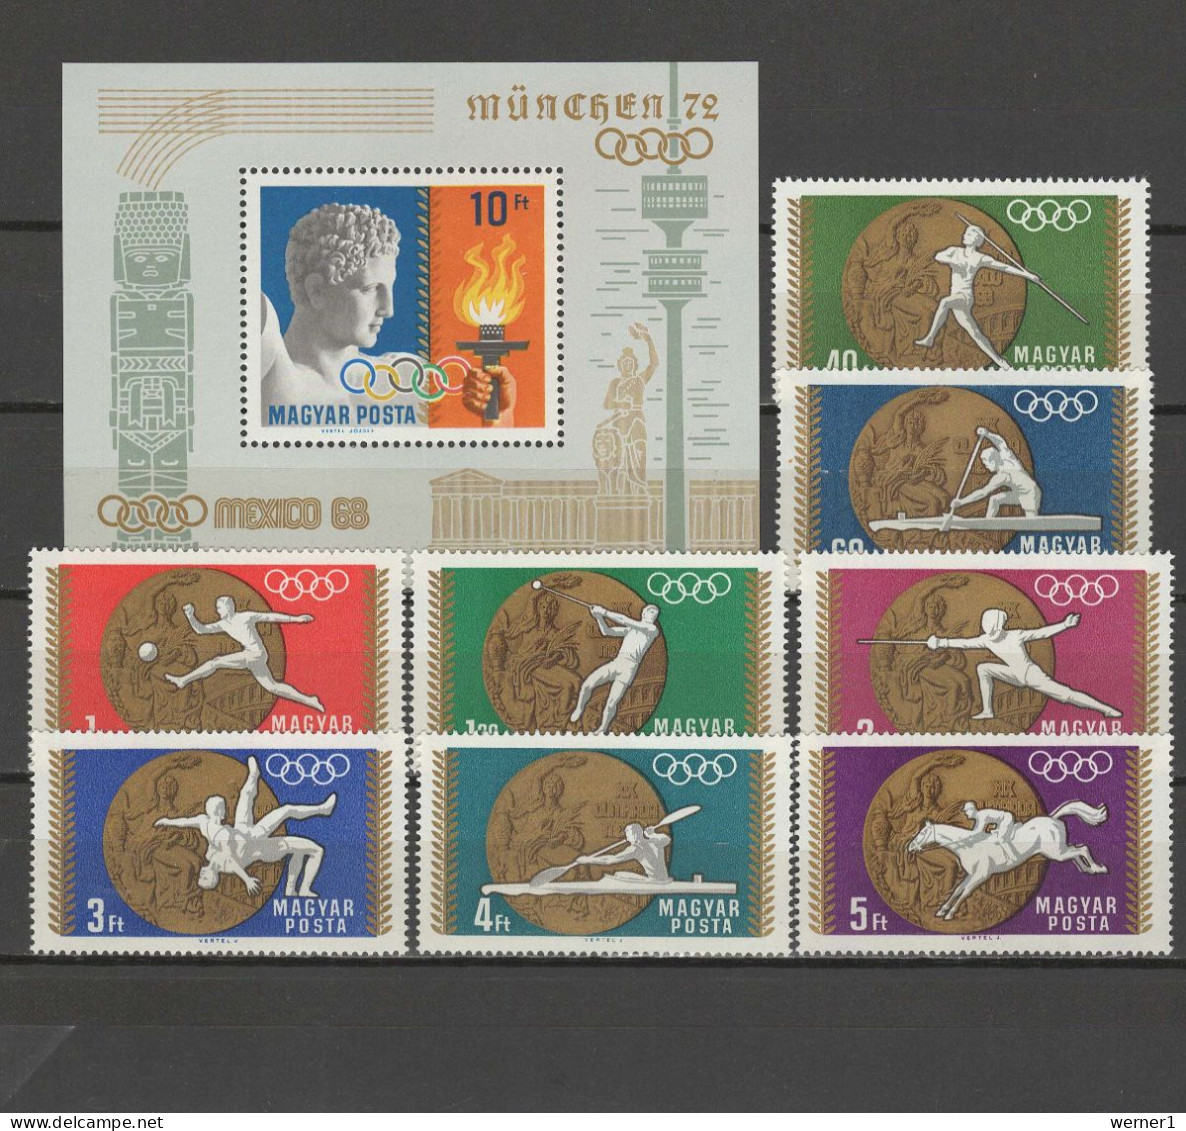 Hungary 1969 Olympic Games Mexico, Football Soccer, Athletics, Equestrian, Wrestling, Fencing Etc. Set Of 8 + S/s MNH - Ete 1968: Mexico